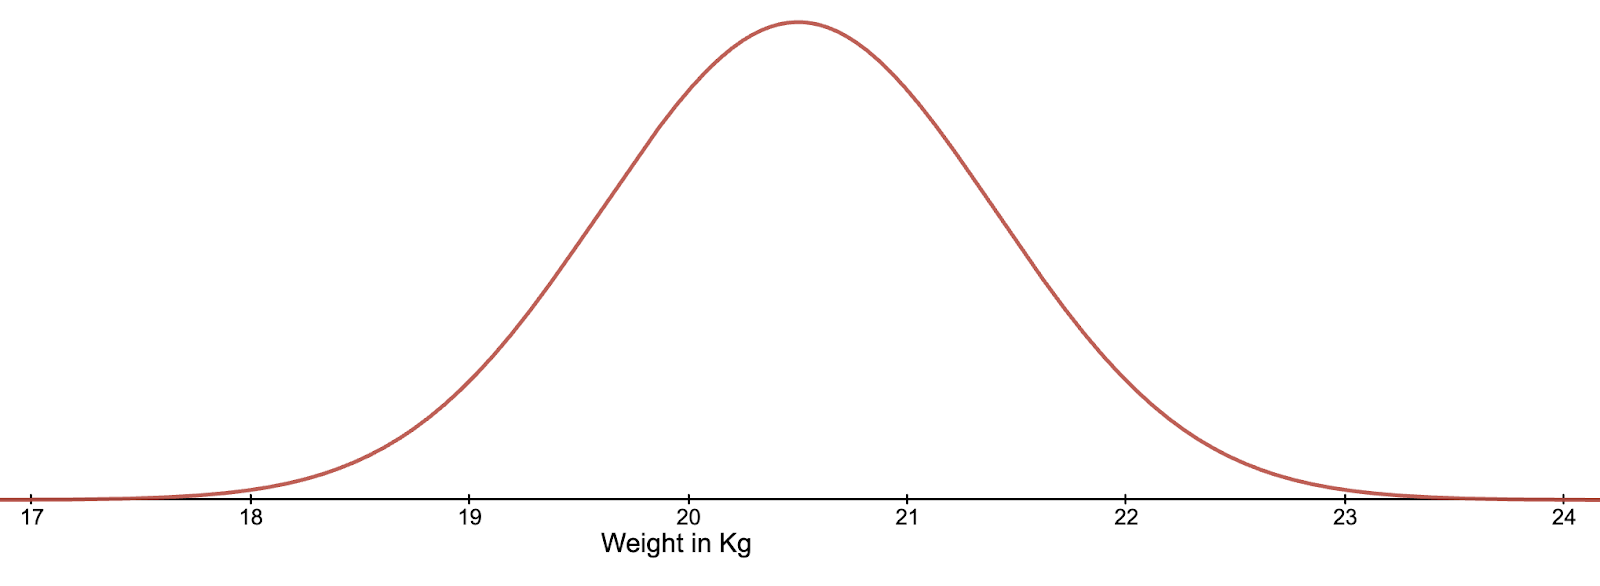 graph showing a normal distribution - where the middle of a data set is highest and form a bell curve